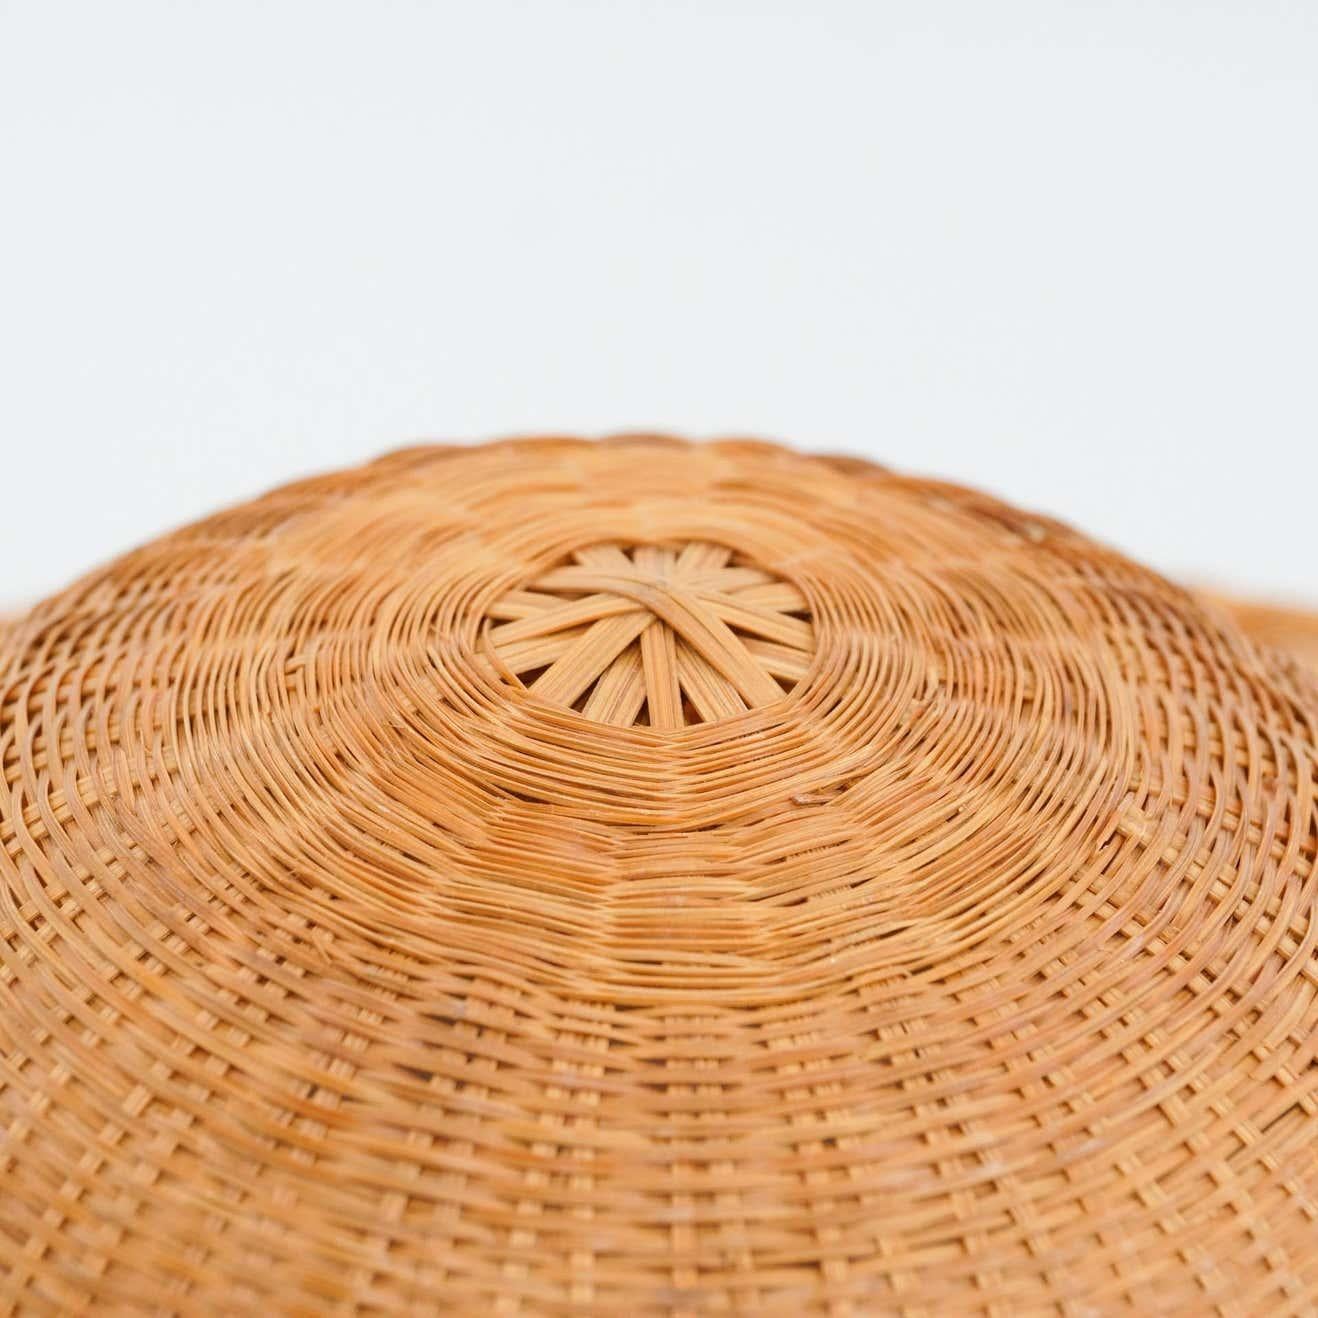 Asian hat, circa 1950.
By unknown manufacturer, from Asia.

In original condition, with some visible signs of previous use and age, preserving a beautiful patina.

Materials:
Rattan

Dimensions:
ø 37.5 cm x H 11 cm.